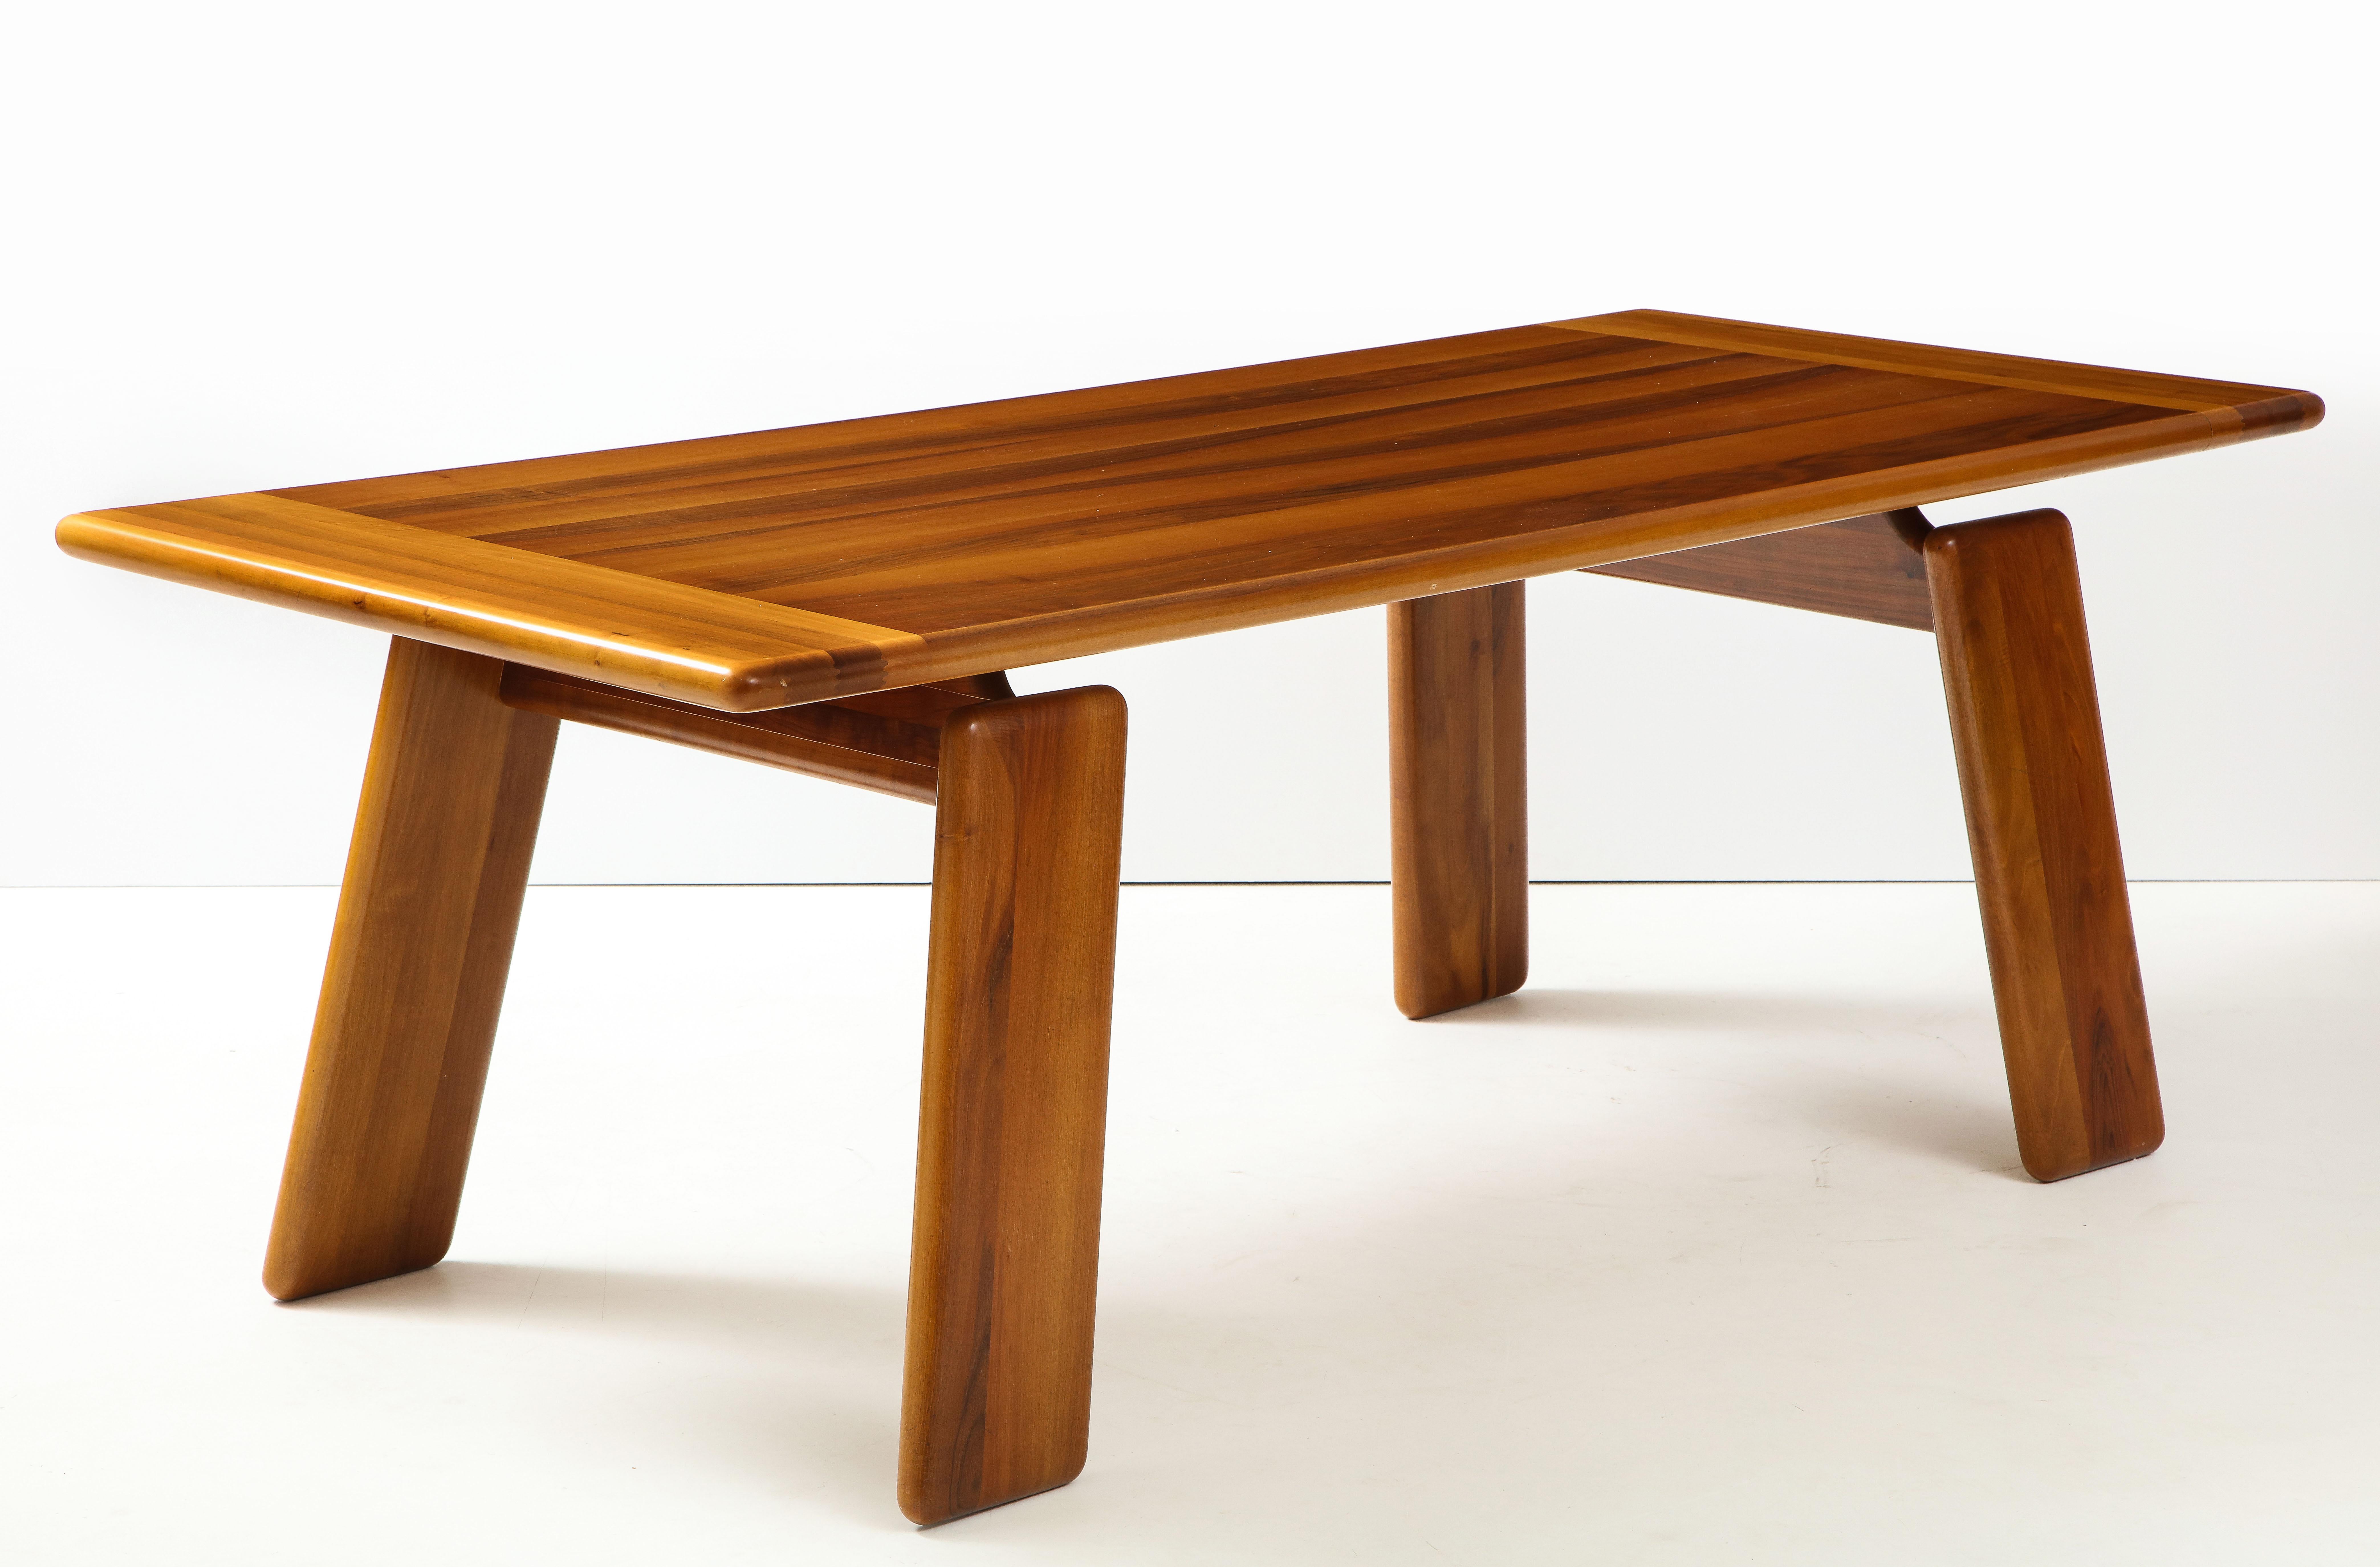 An Italian walnut floating dining table designed by Afra & Tobia Scarpa, made by Sapporo for Mobil Girgi, 1970's. The canted legs are connected to a horizontal stretcher, which support the top, creating the visual effect of a floating table top. The